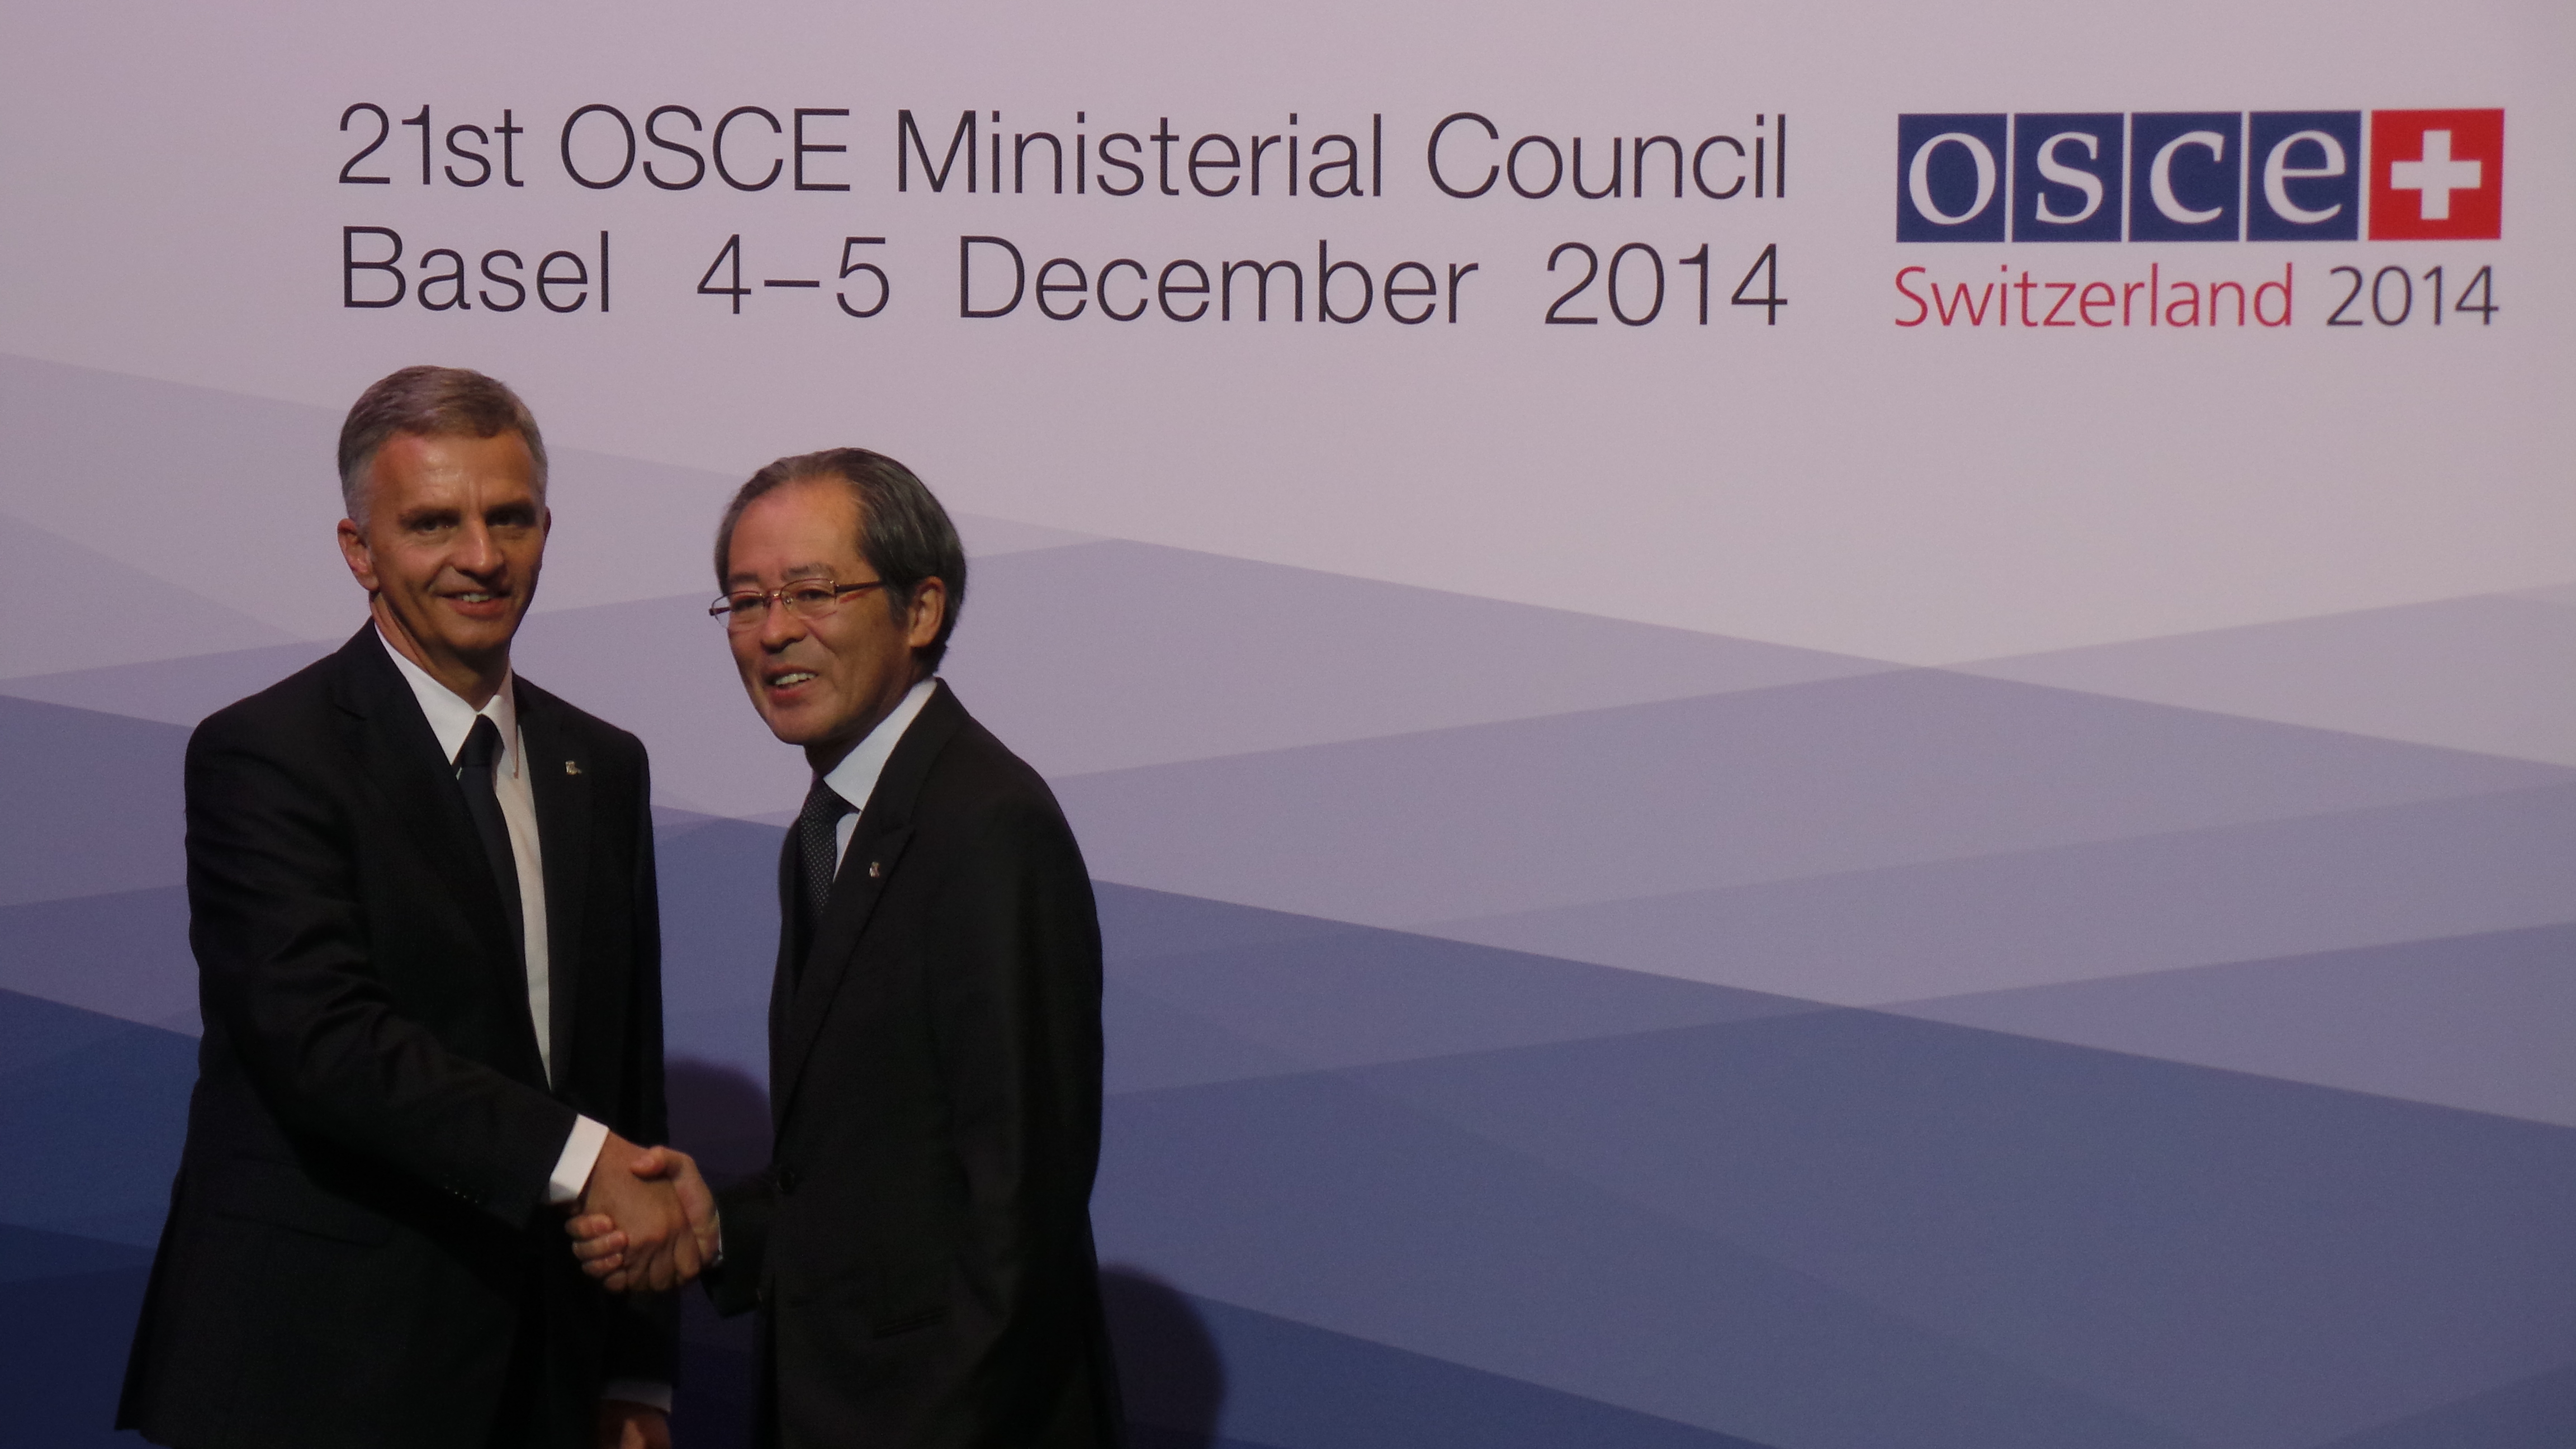 The President of the Swiss Confederation, Didier Burkhalter, greets Masaharu Kono, Special Representative (for the Middle East and Europe) in Japan at the OSCE Ministerial Council 2014 in Basel